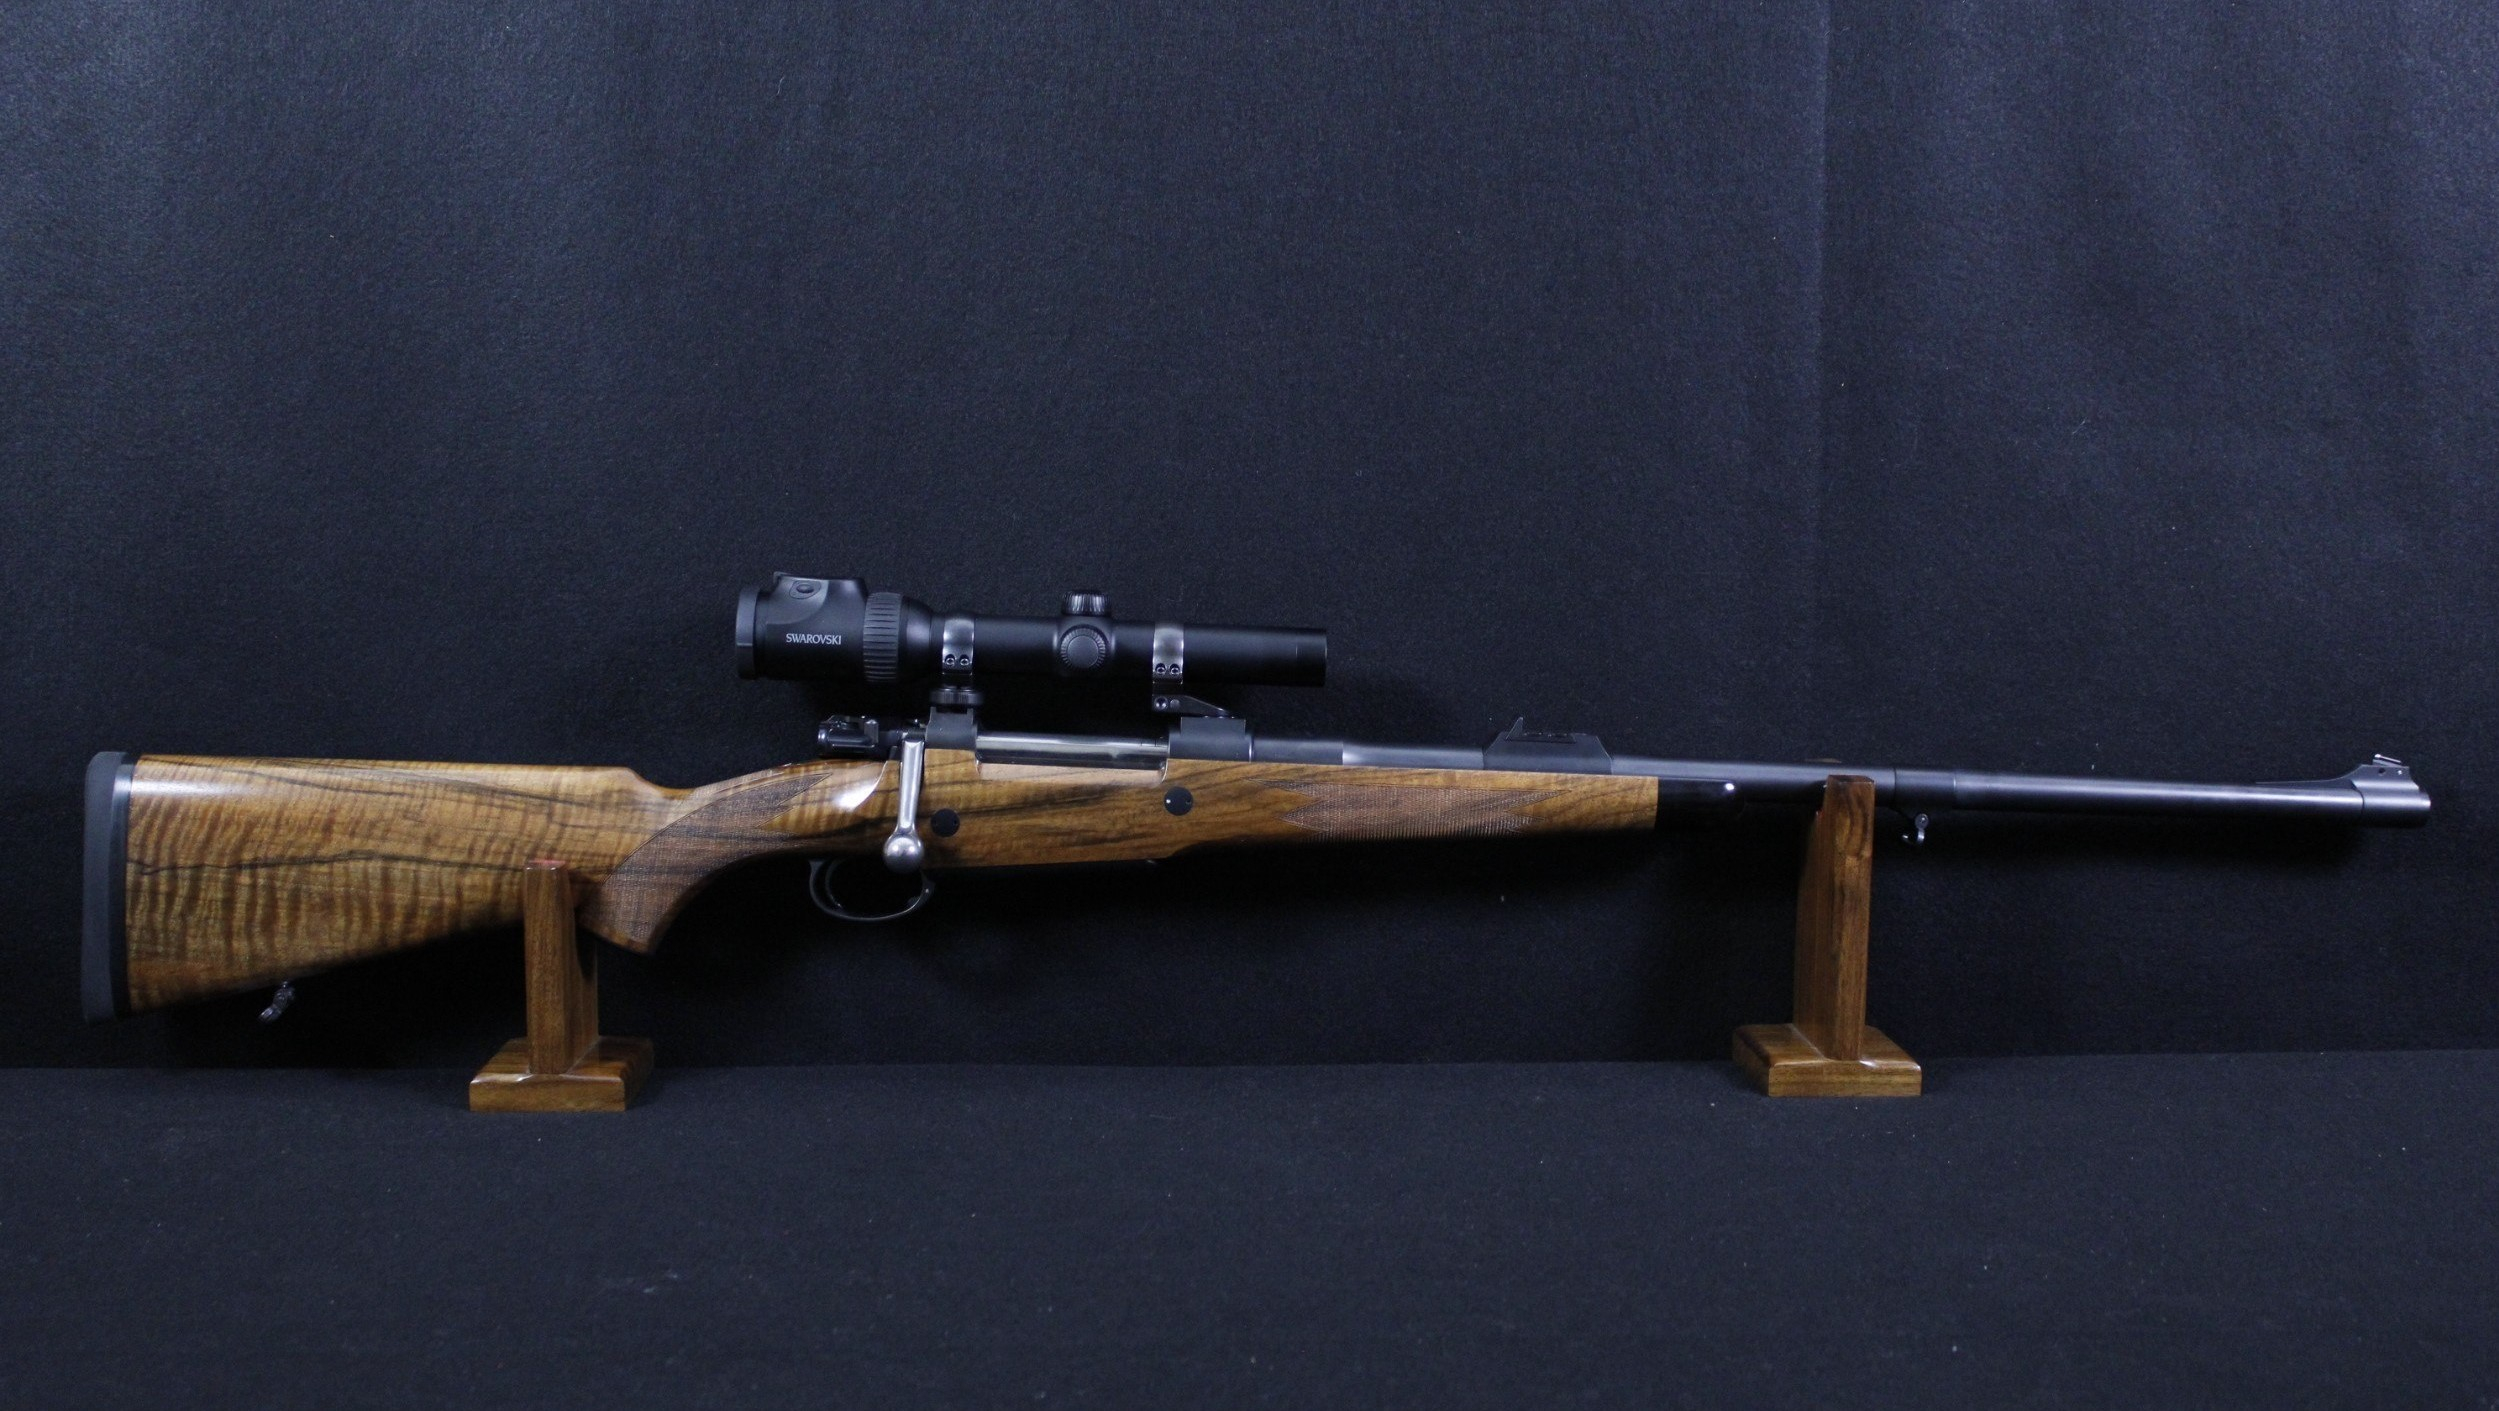 Mauser M98 Magnum, chambered for .416 Rigby 